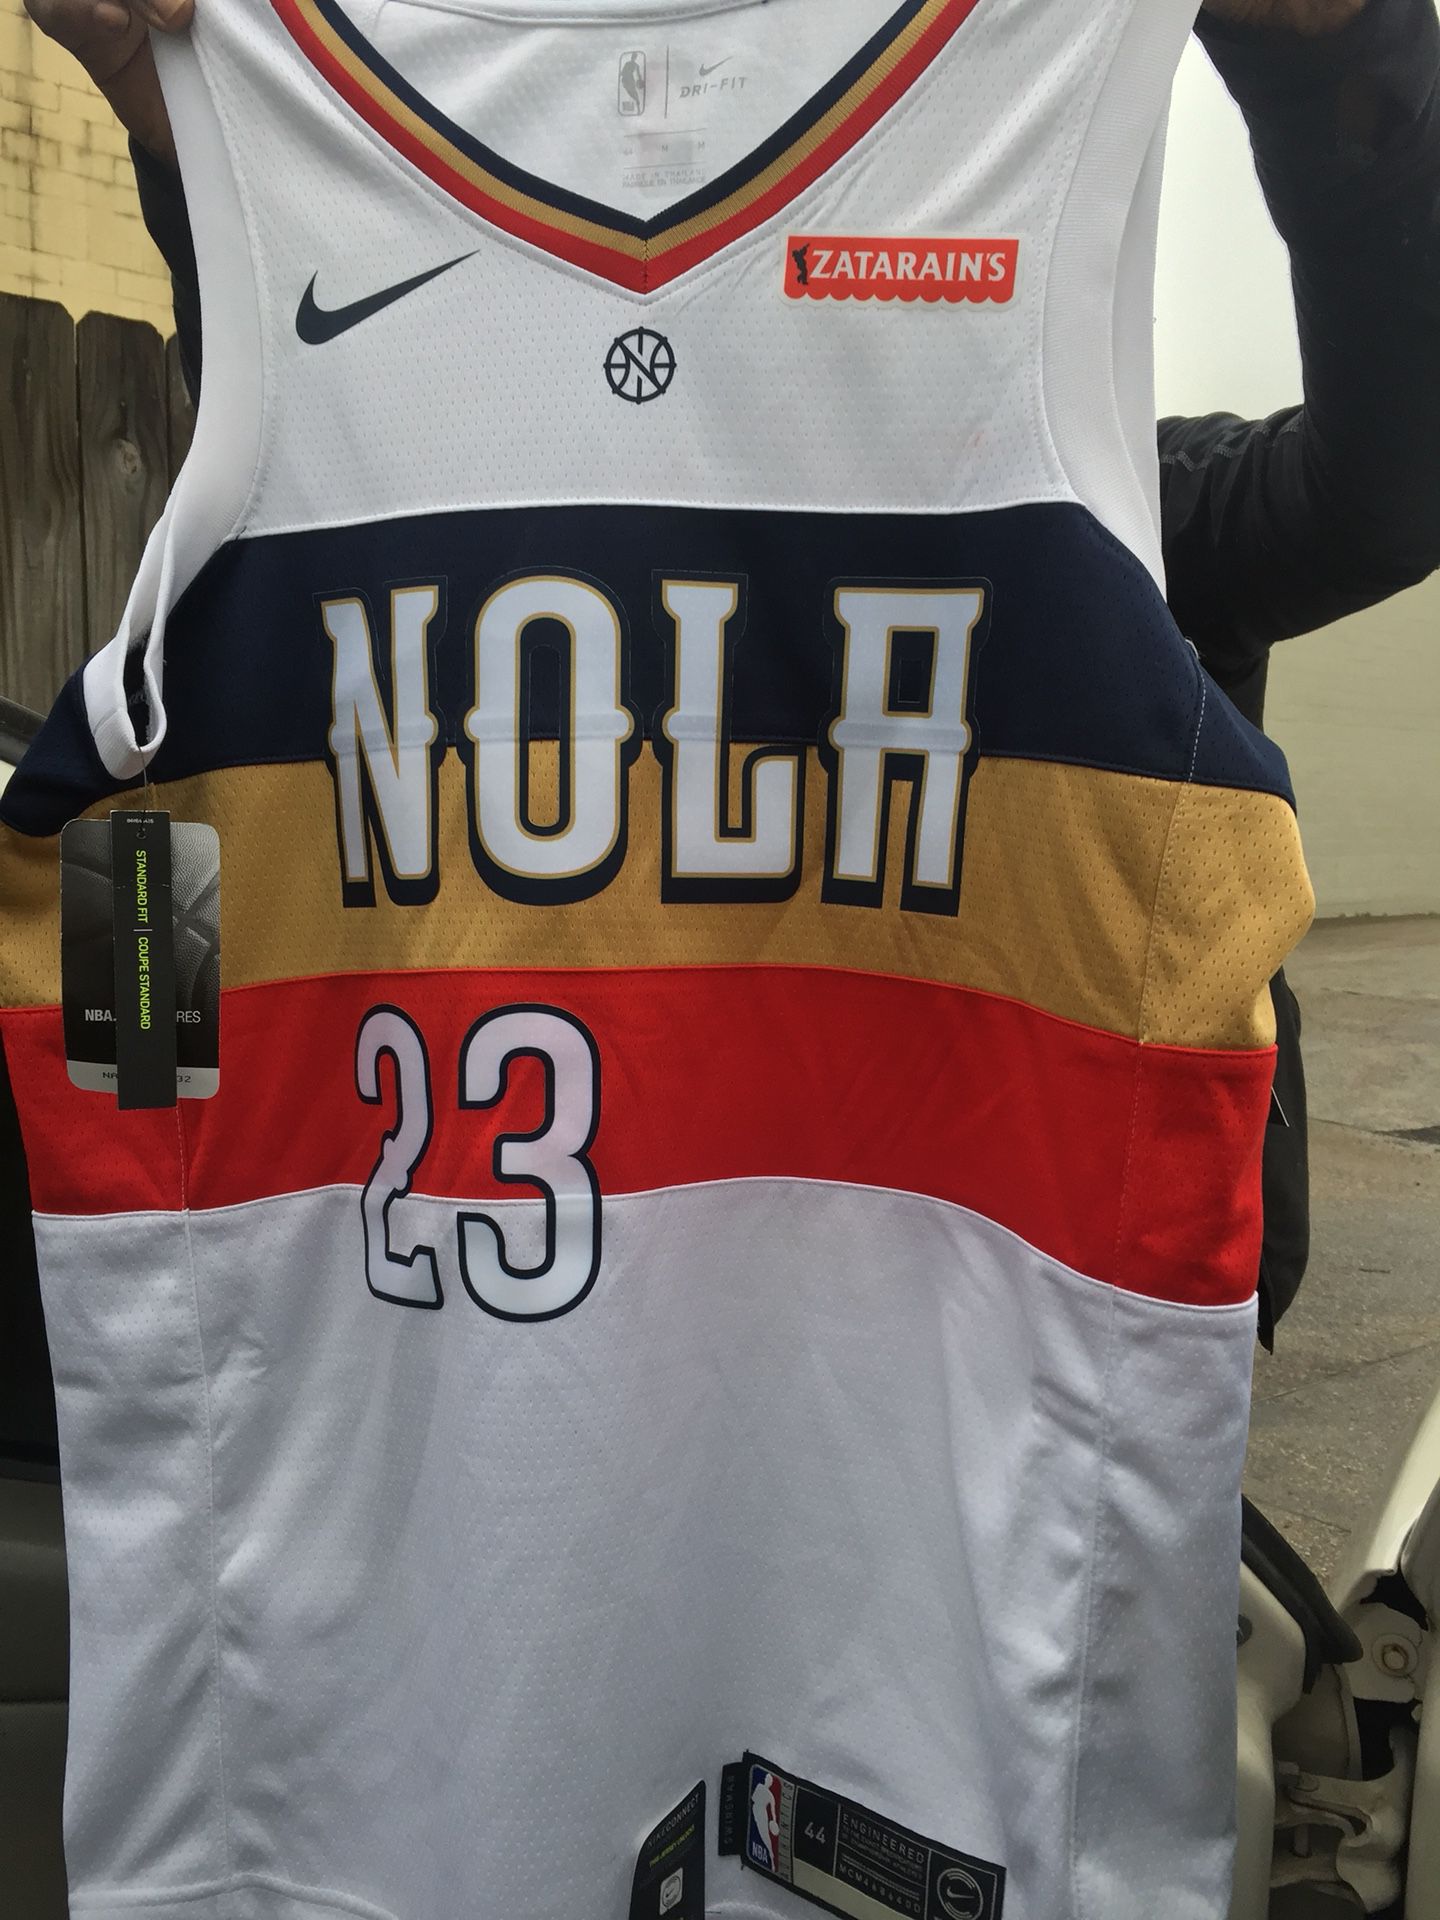 New Orleans Pelicans Jersey for Sale in Pumpkin Center, CA - OfferUp